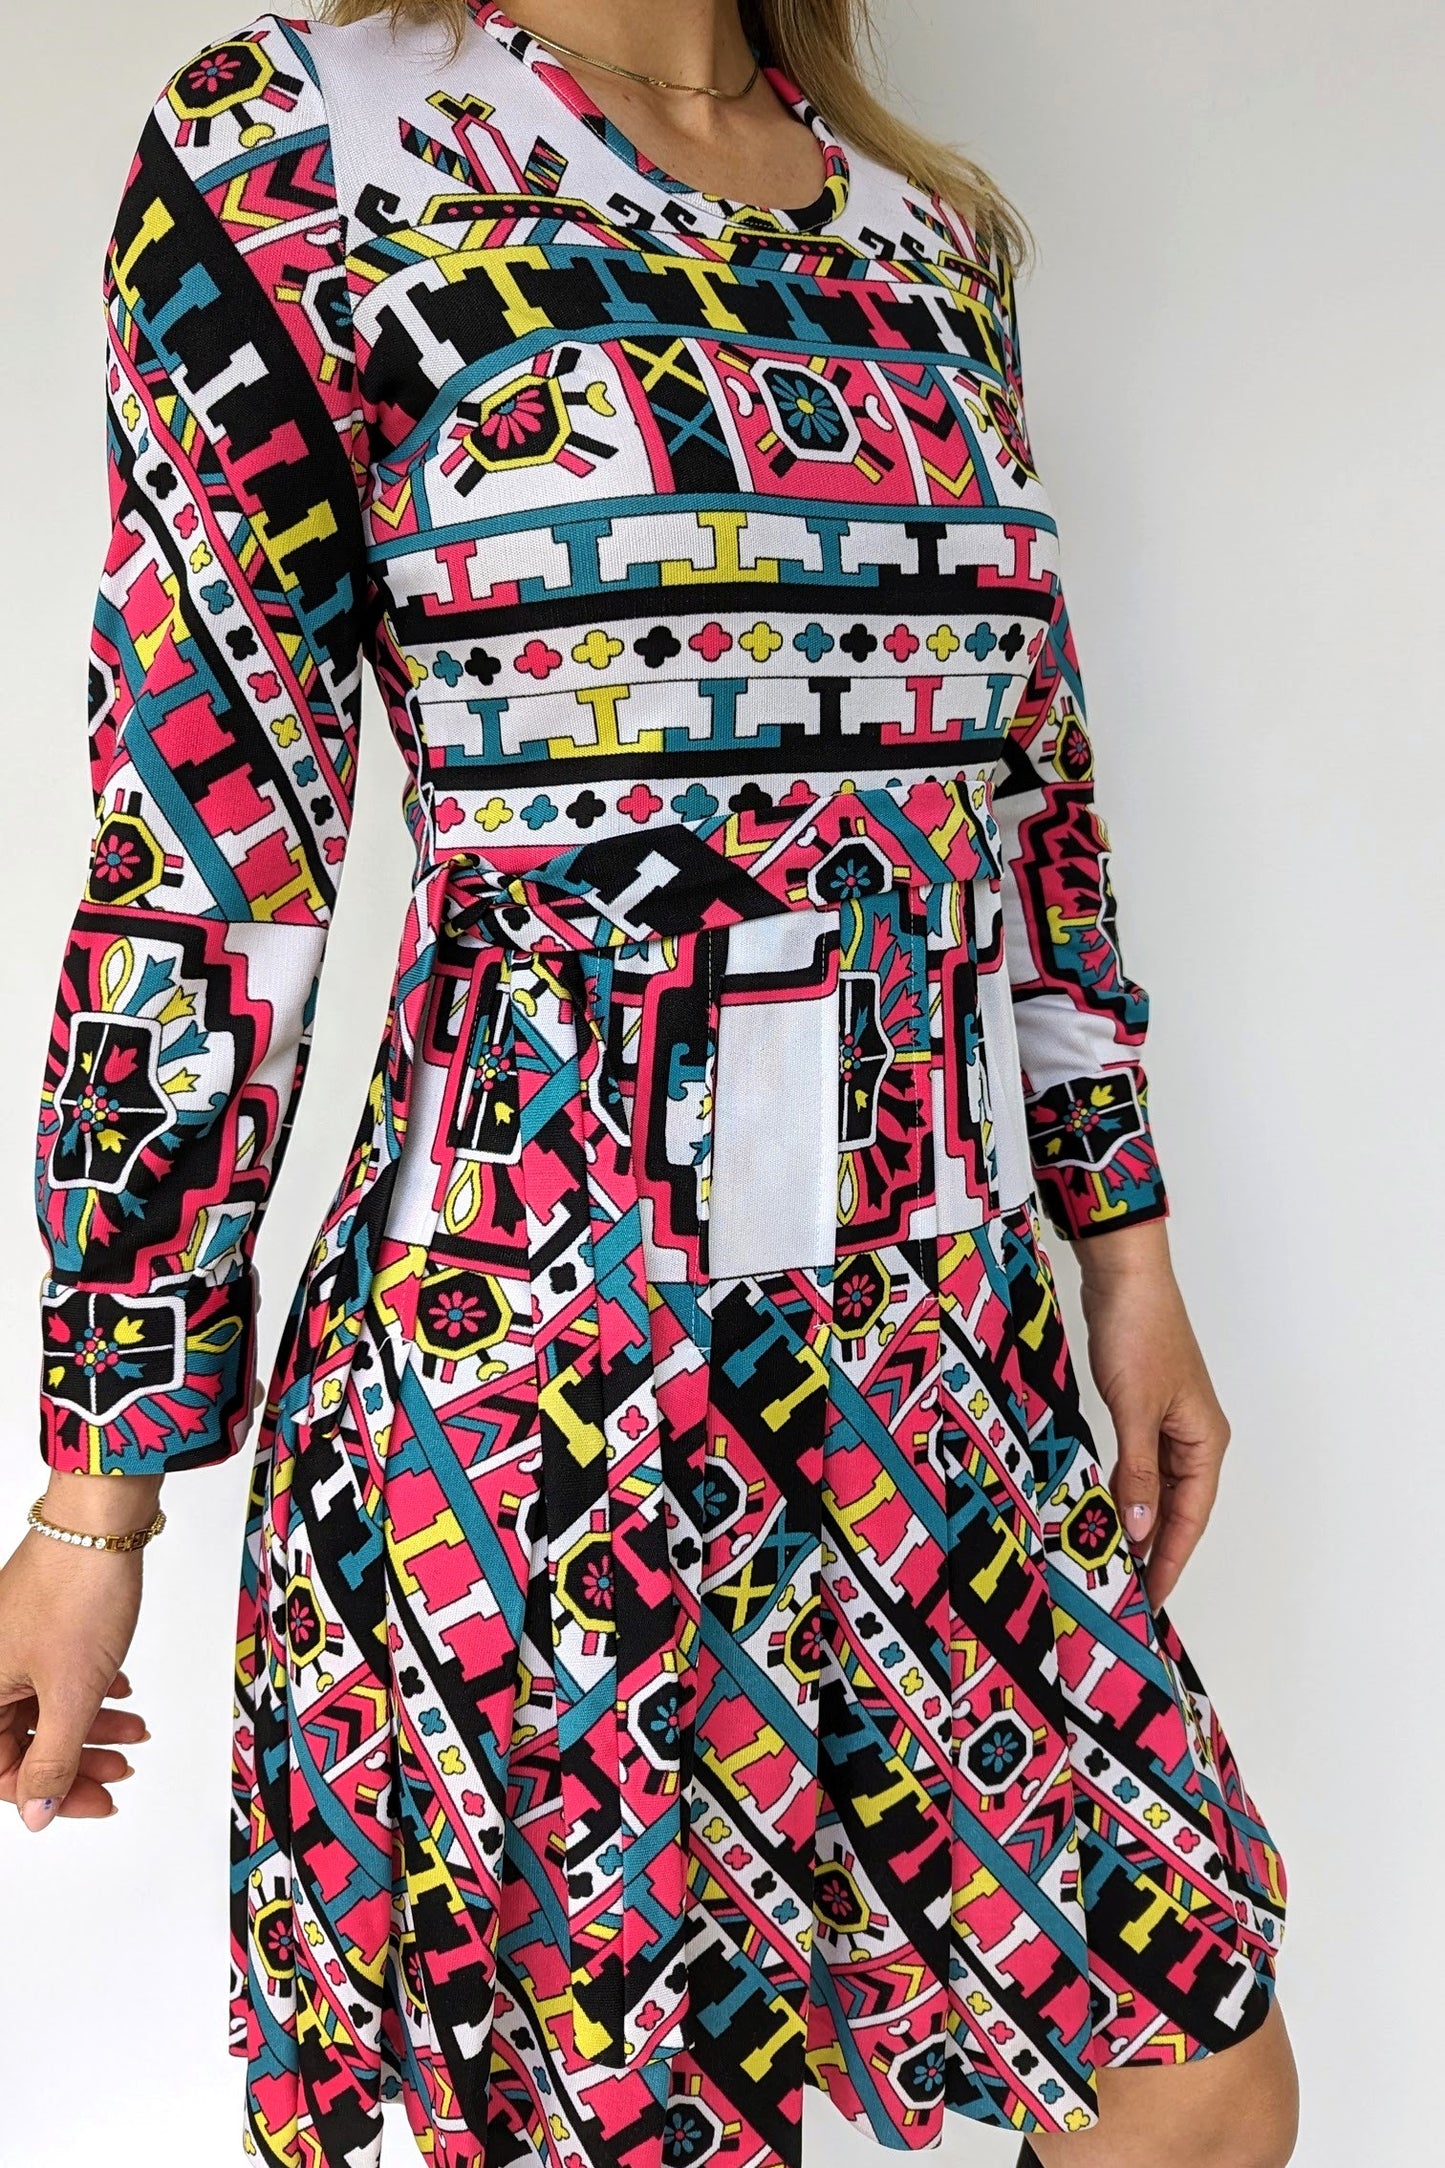 1970s patterned dress with belt and pleats in what, black, pink and turquoise geometrics pattern and belt